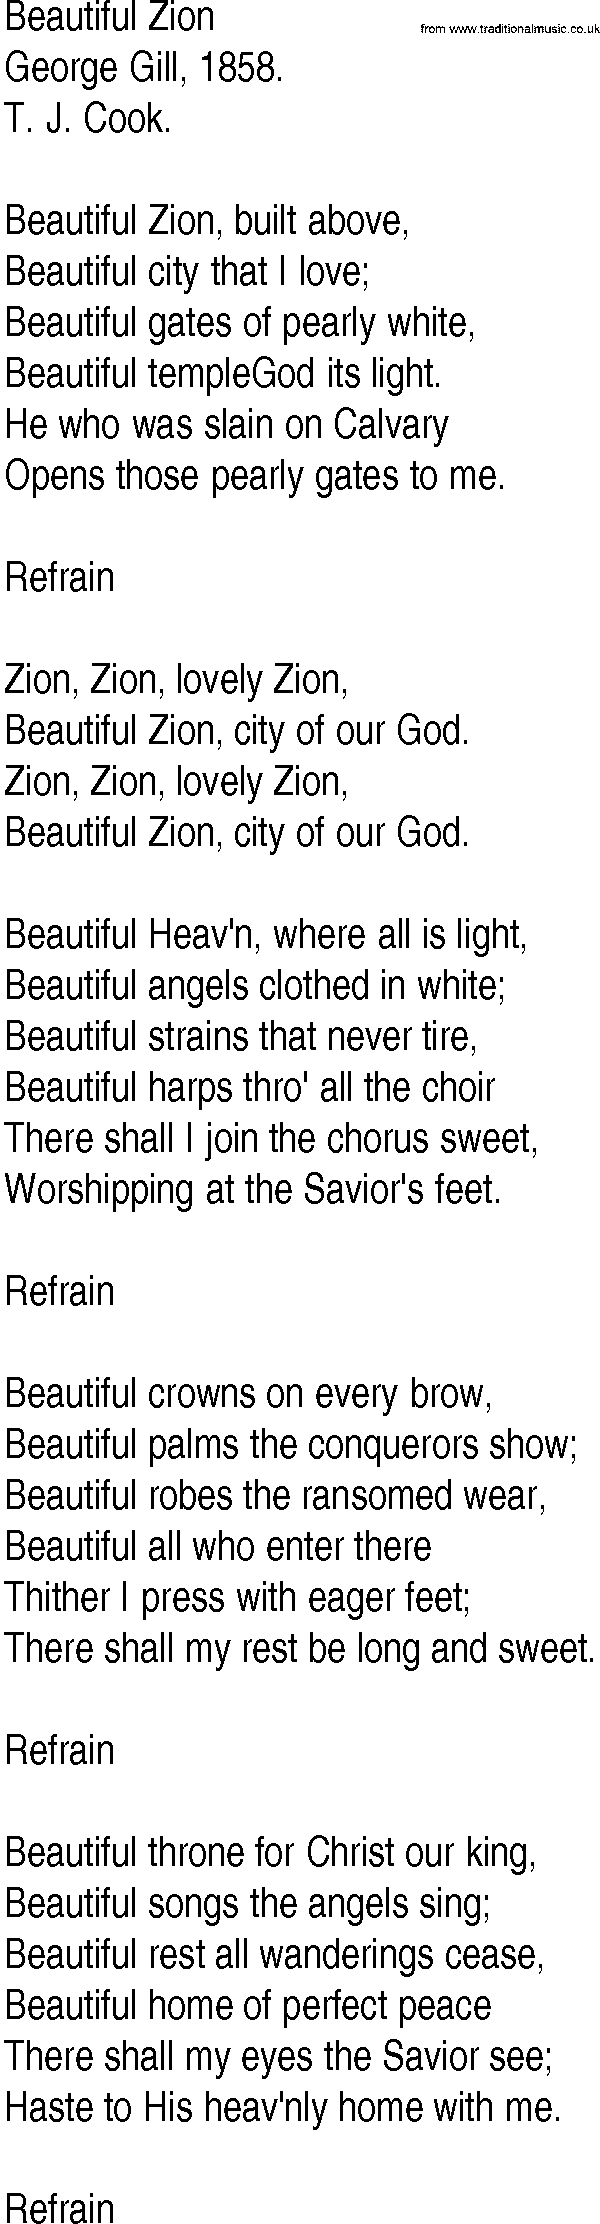 Hymn and Gospel Song: Beautiful Zion by George Gill lyrics